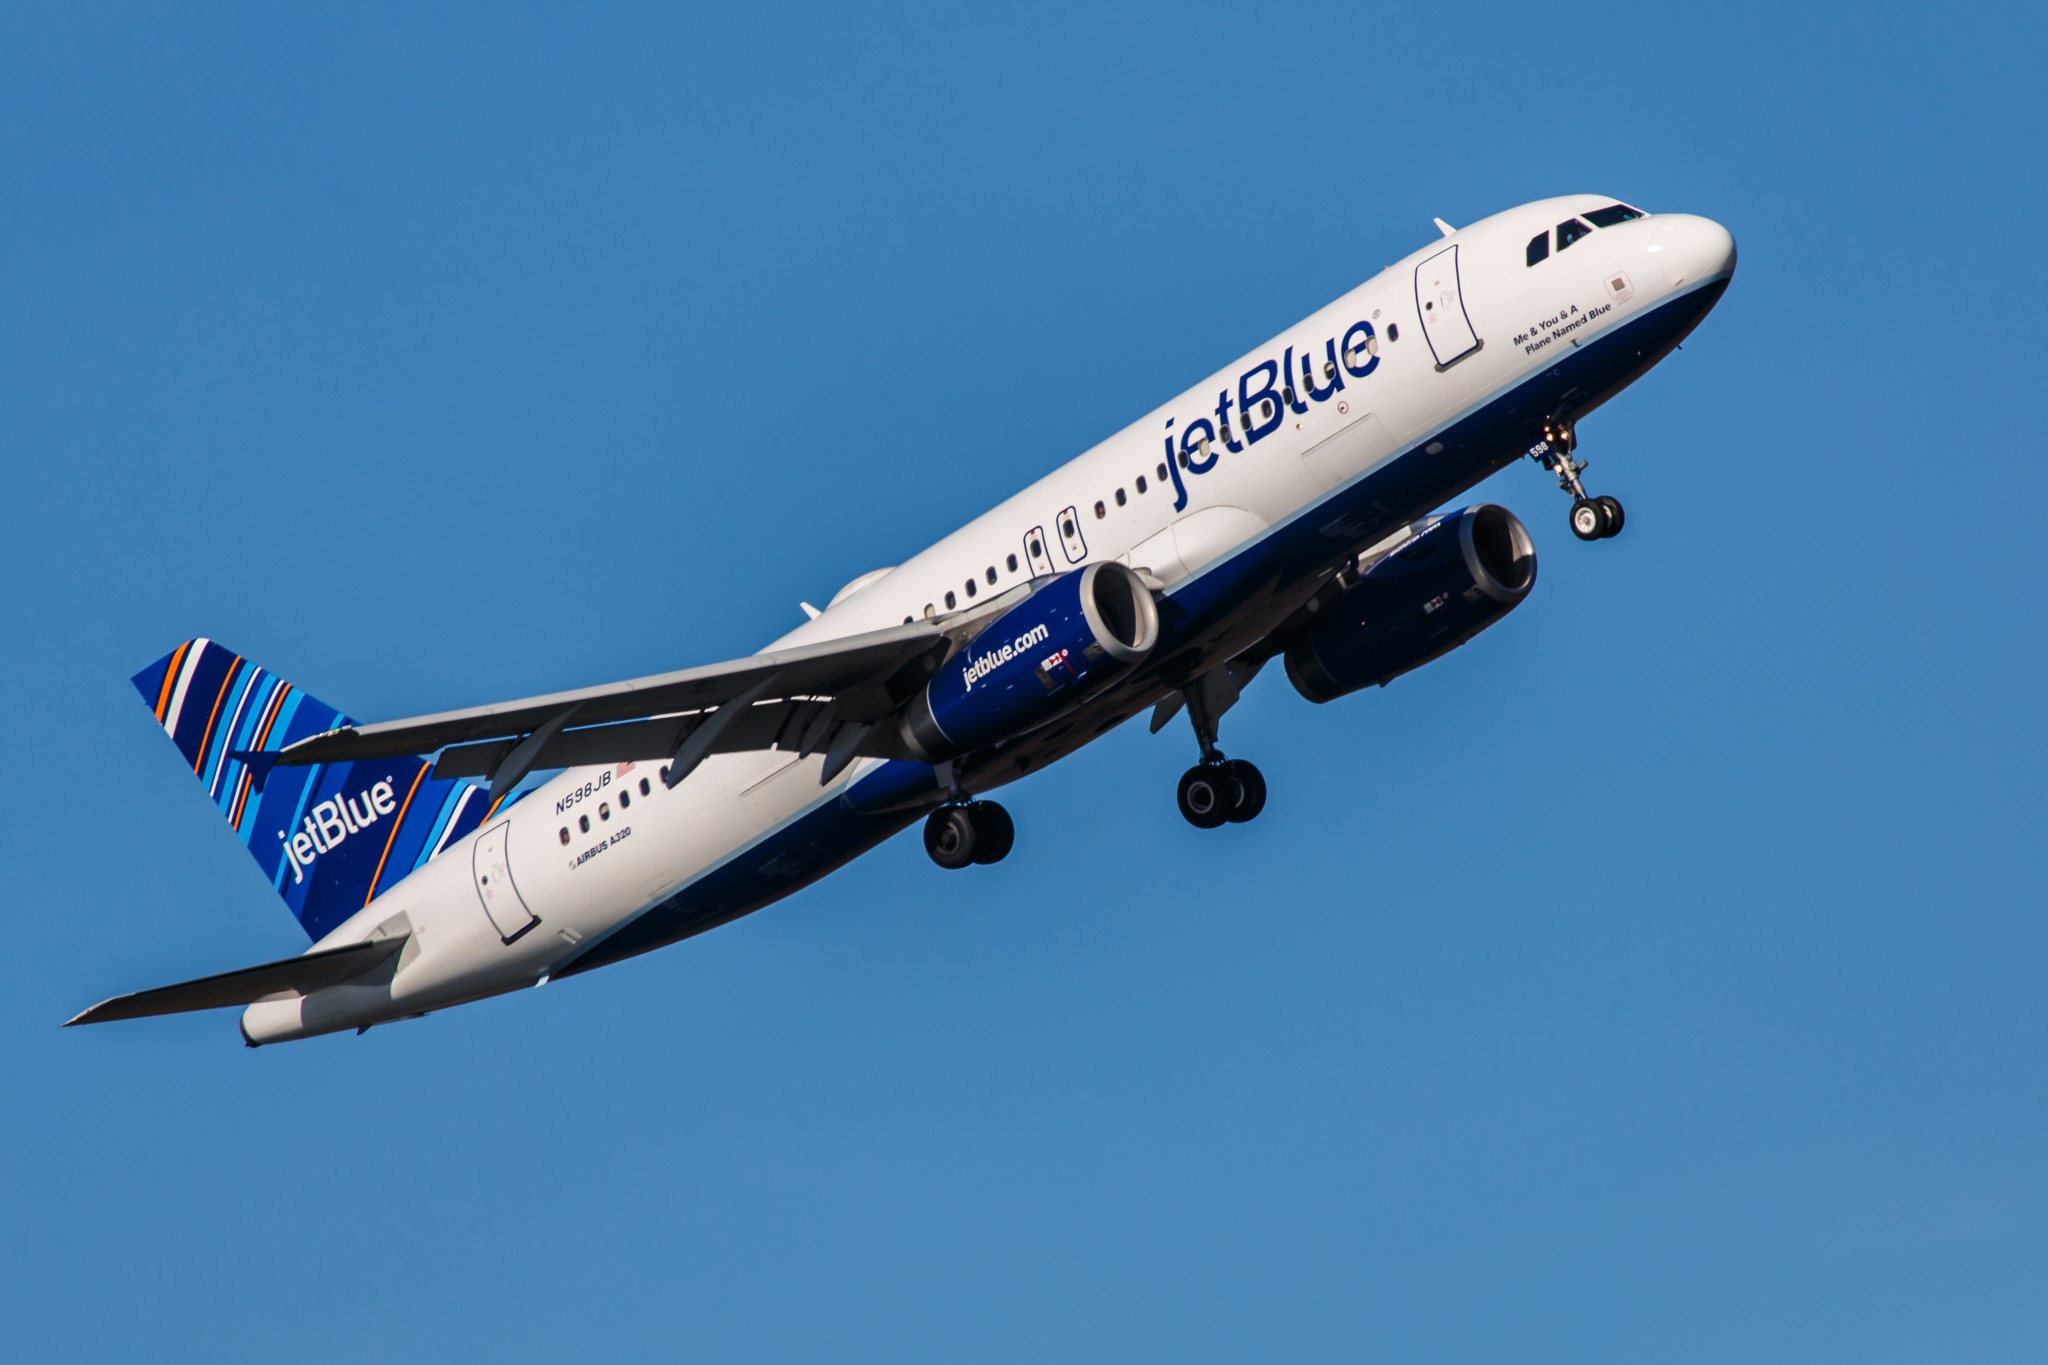 JetBlue reports $57 million profit in Q3 with strong travel demands